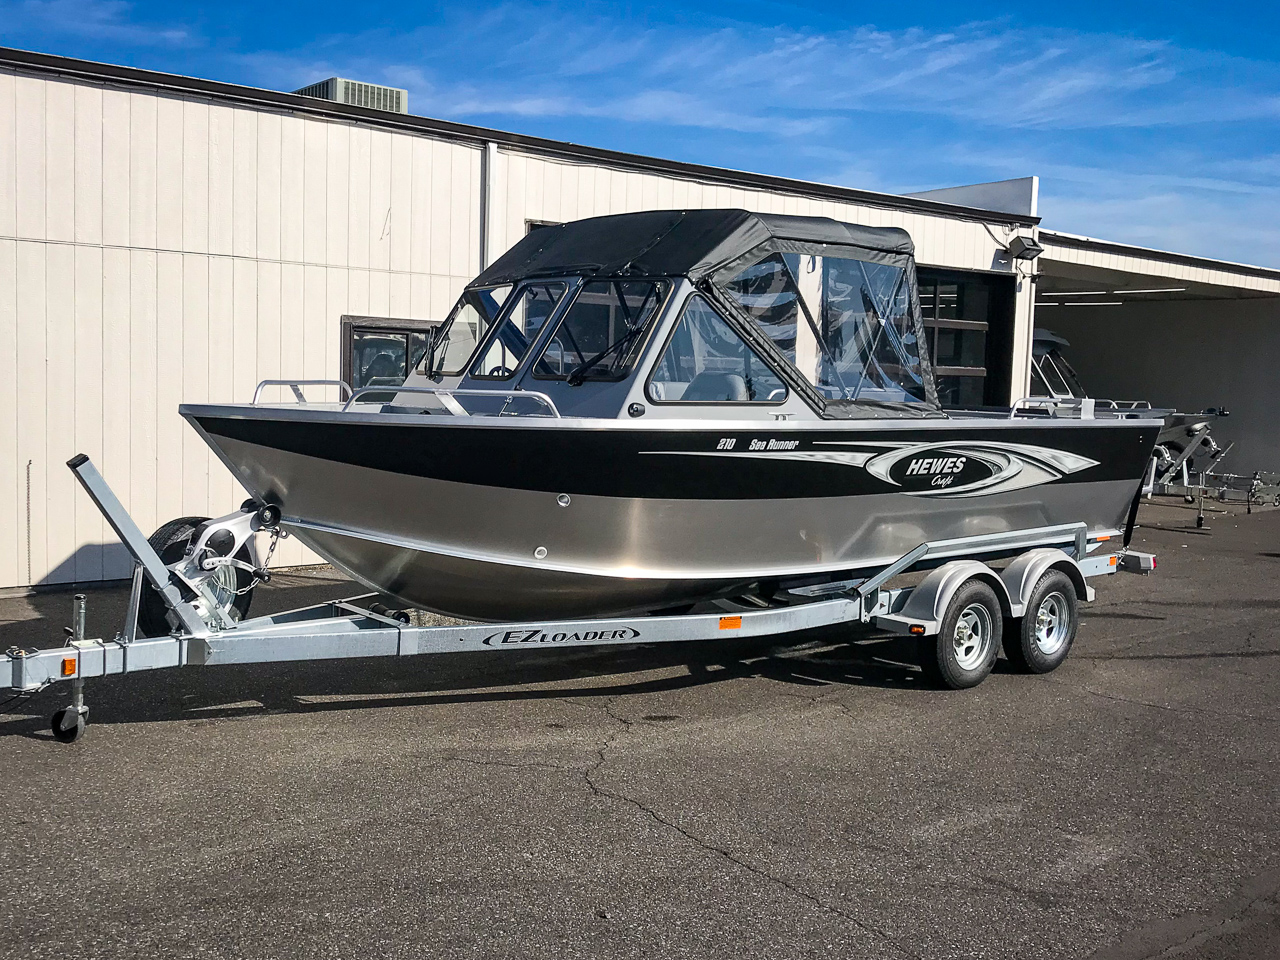 Hewescraft 21 Sea Runner boats for sale in United States - boats.com